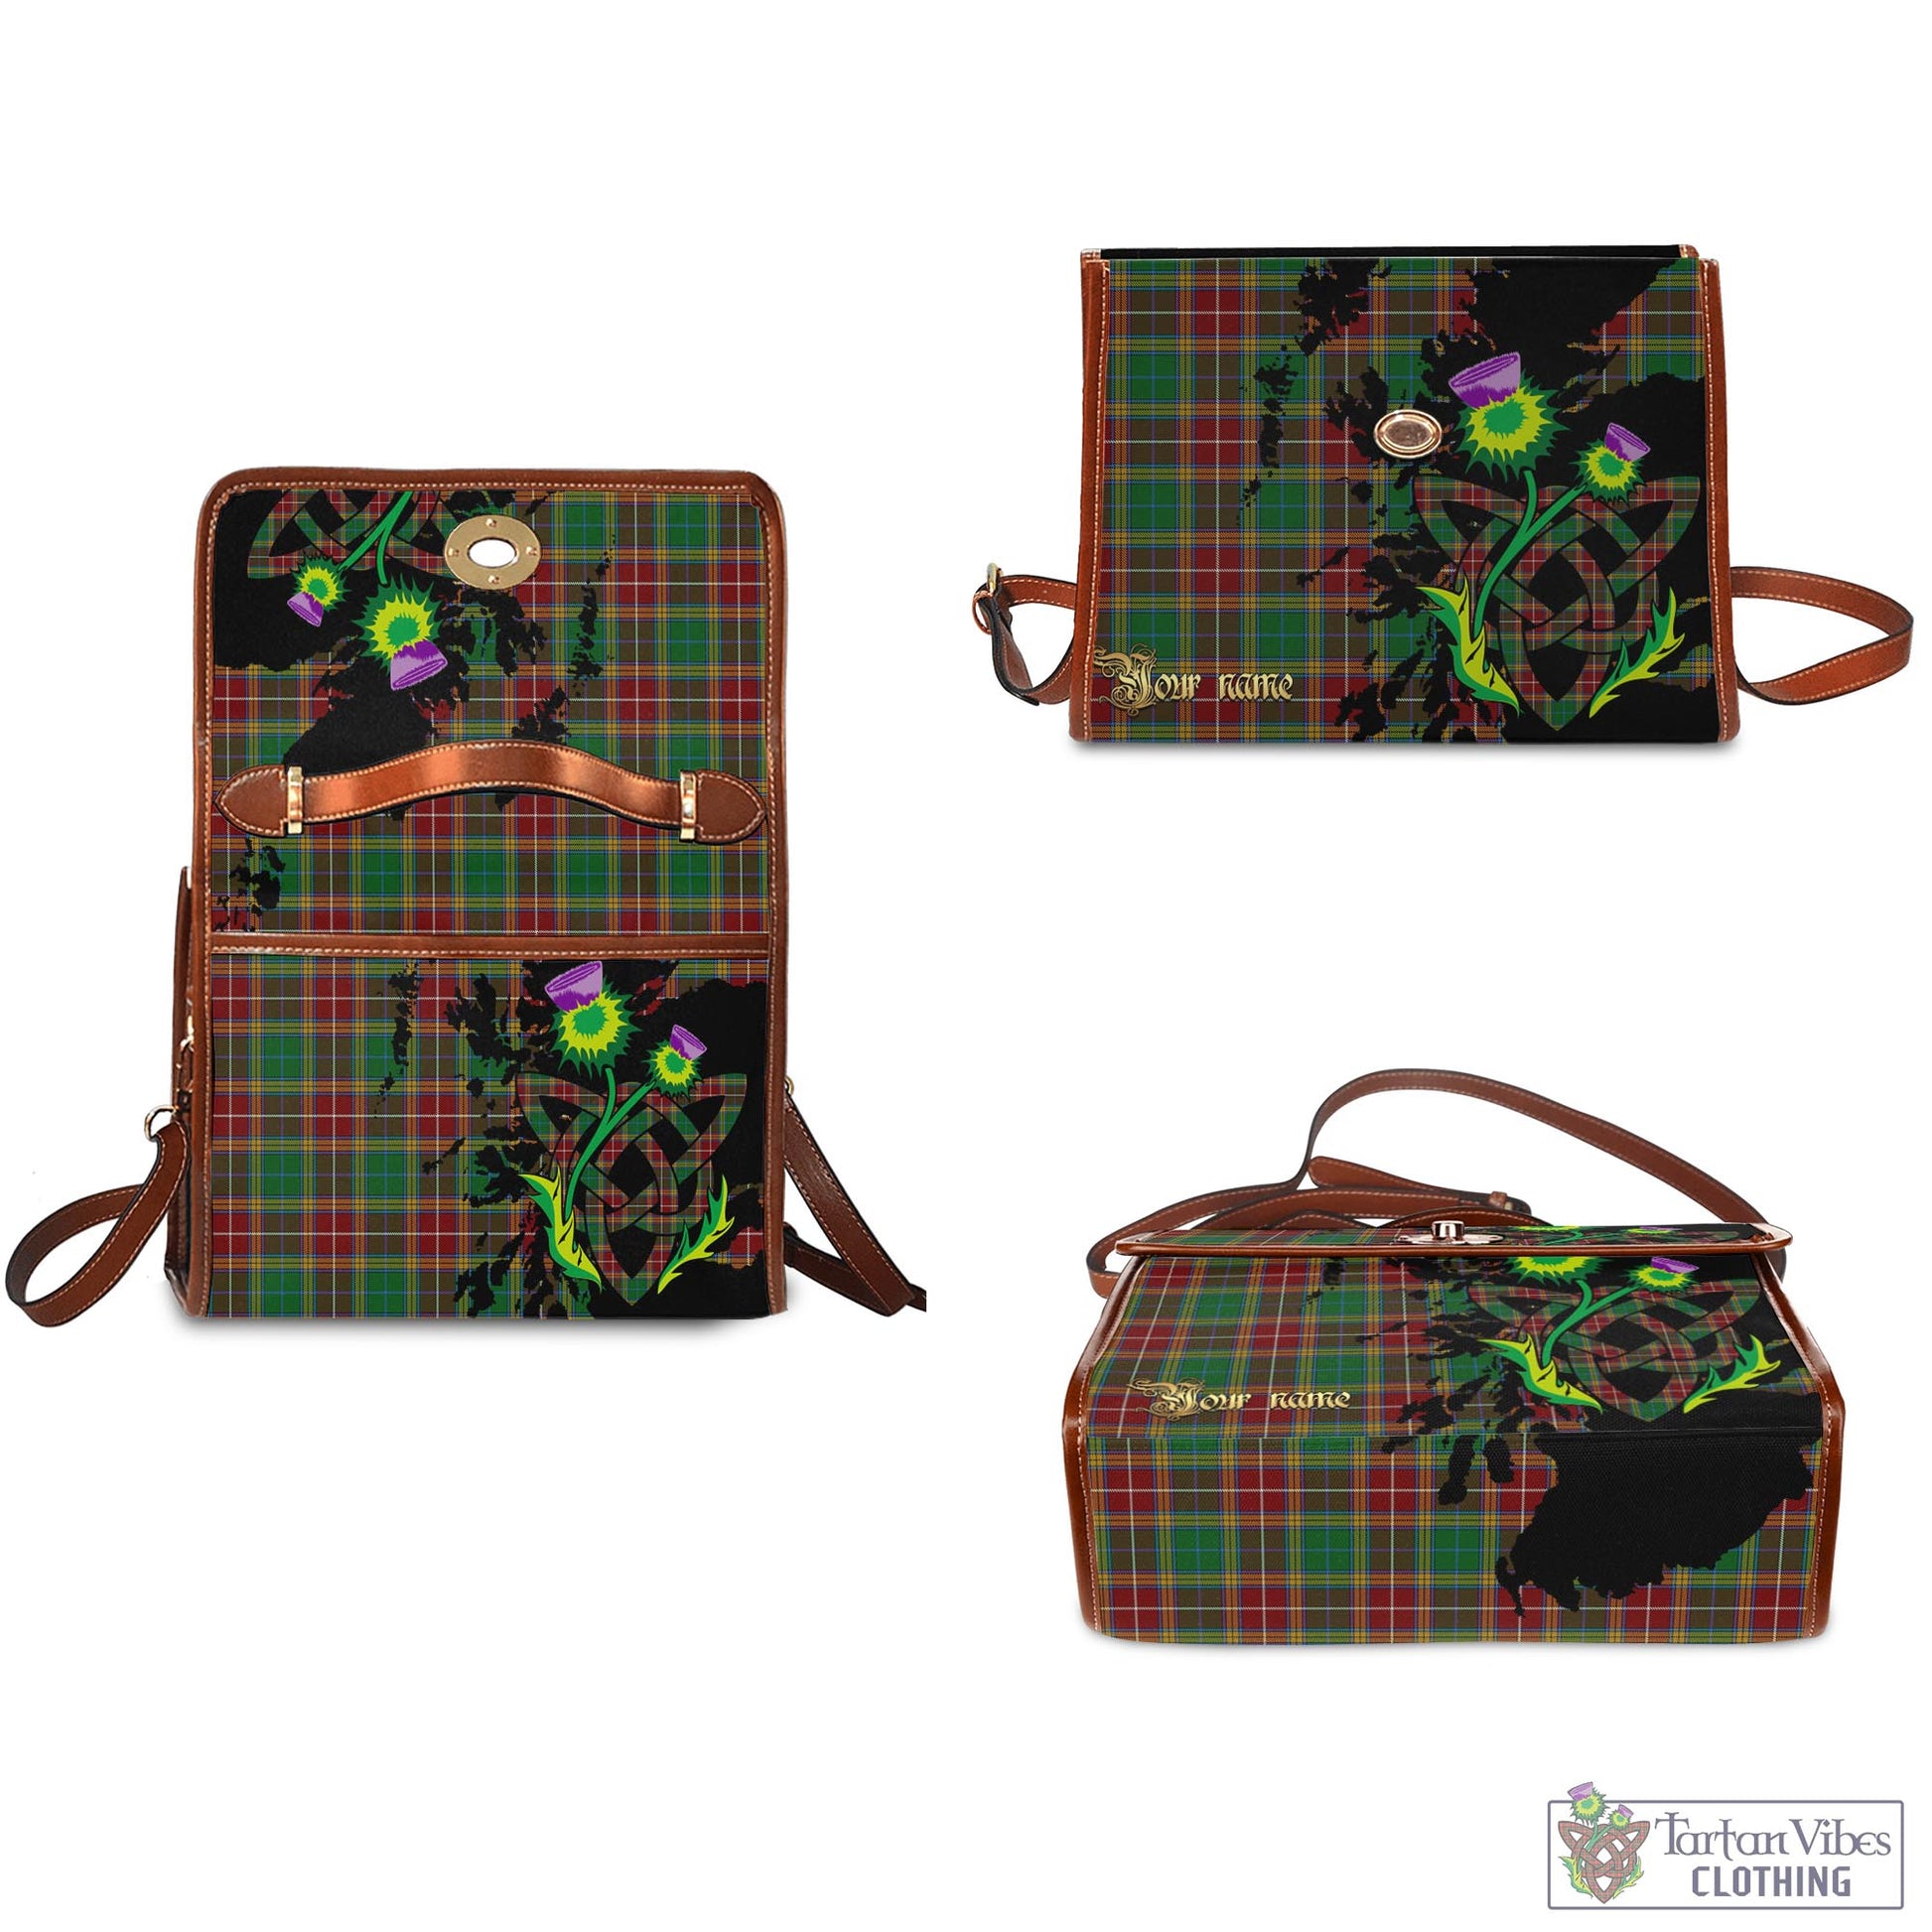 Tartan Vibes Clothing Baxter Tartan Waterproof Canvas Bag with Scotland Map and Thistle Celtic Accents